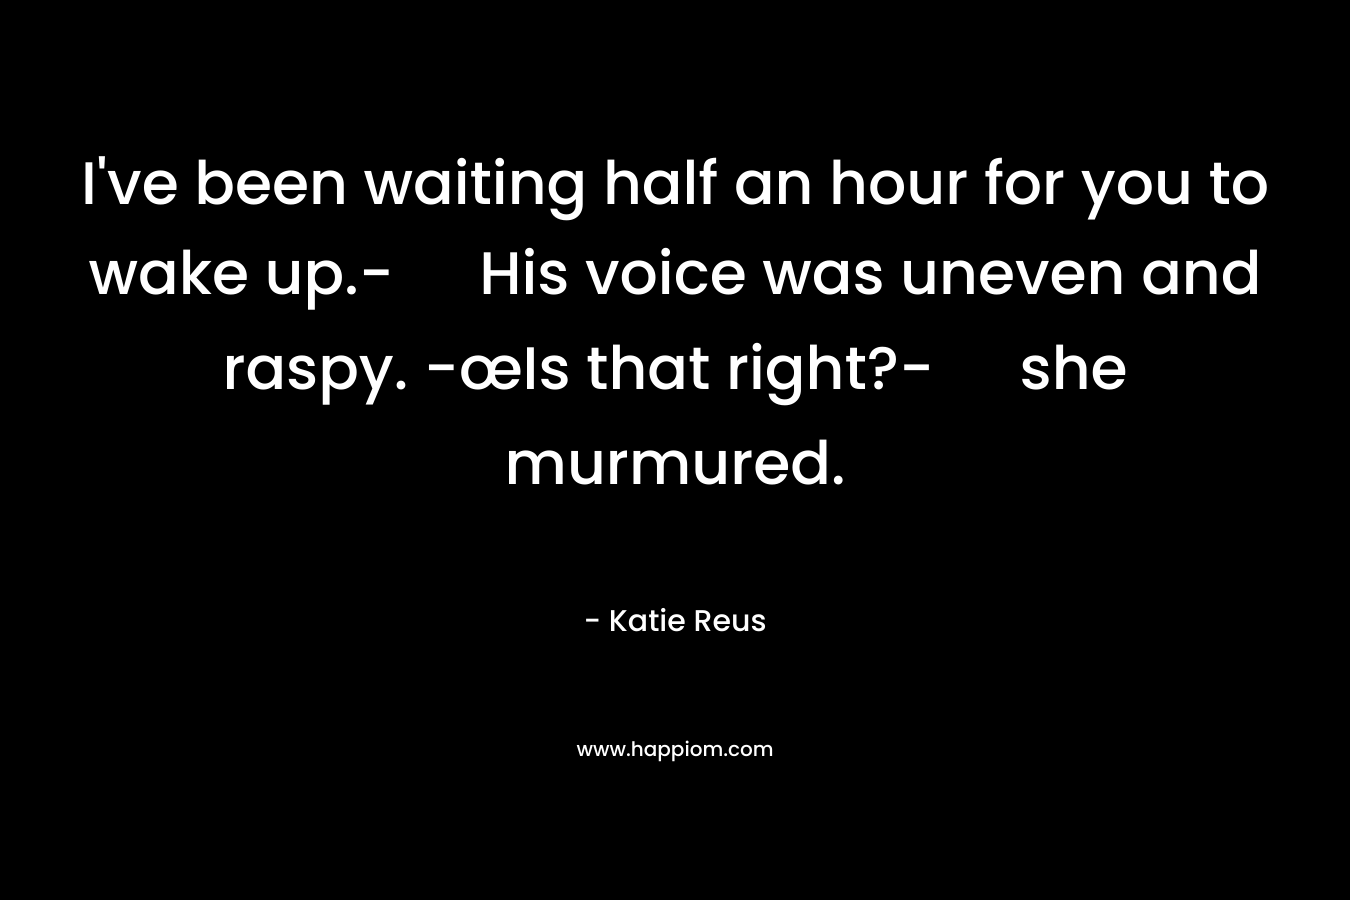 I’ve been waiting half an hour for you to wake up.- His voice was uneven and raspy. -œIs that right?- she murmured. – Katie Reus